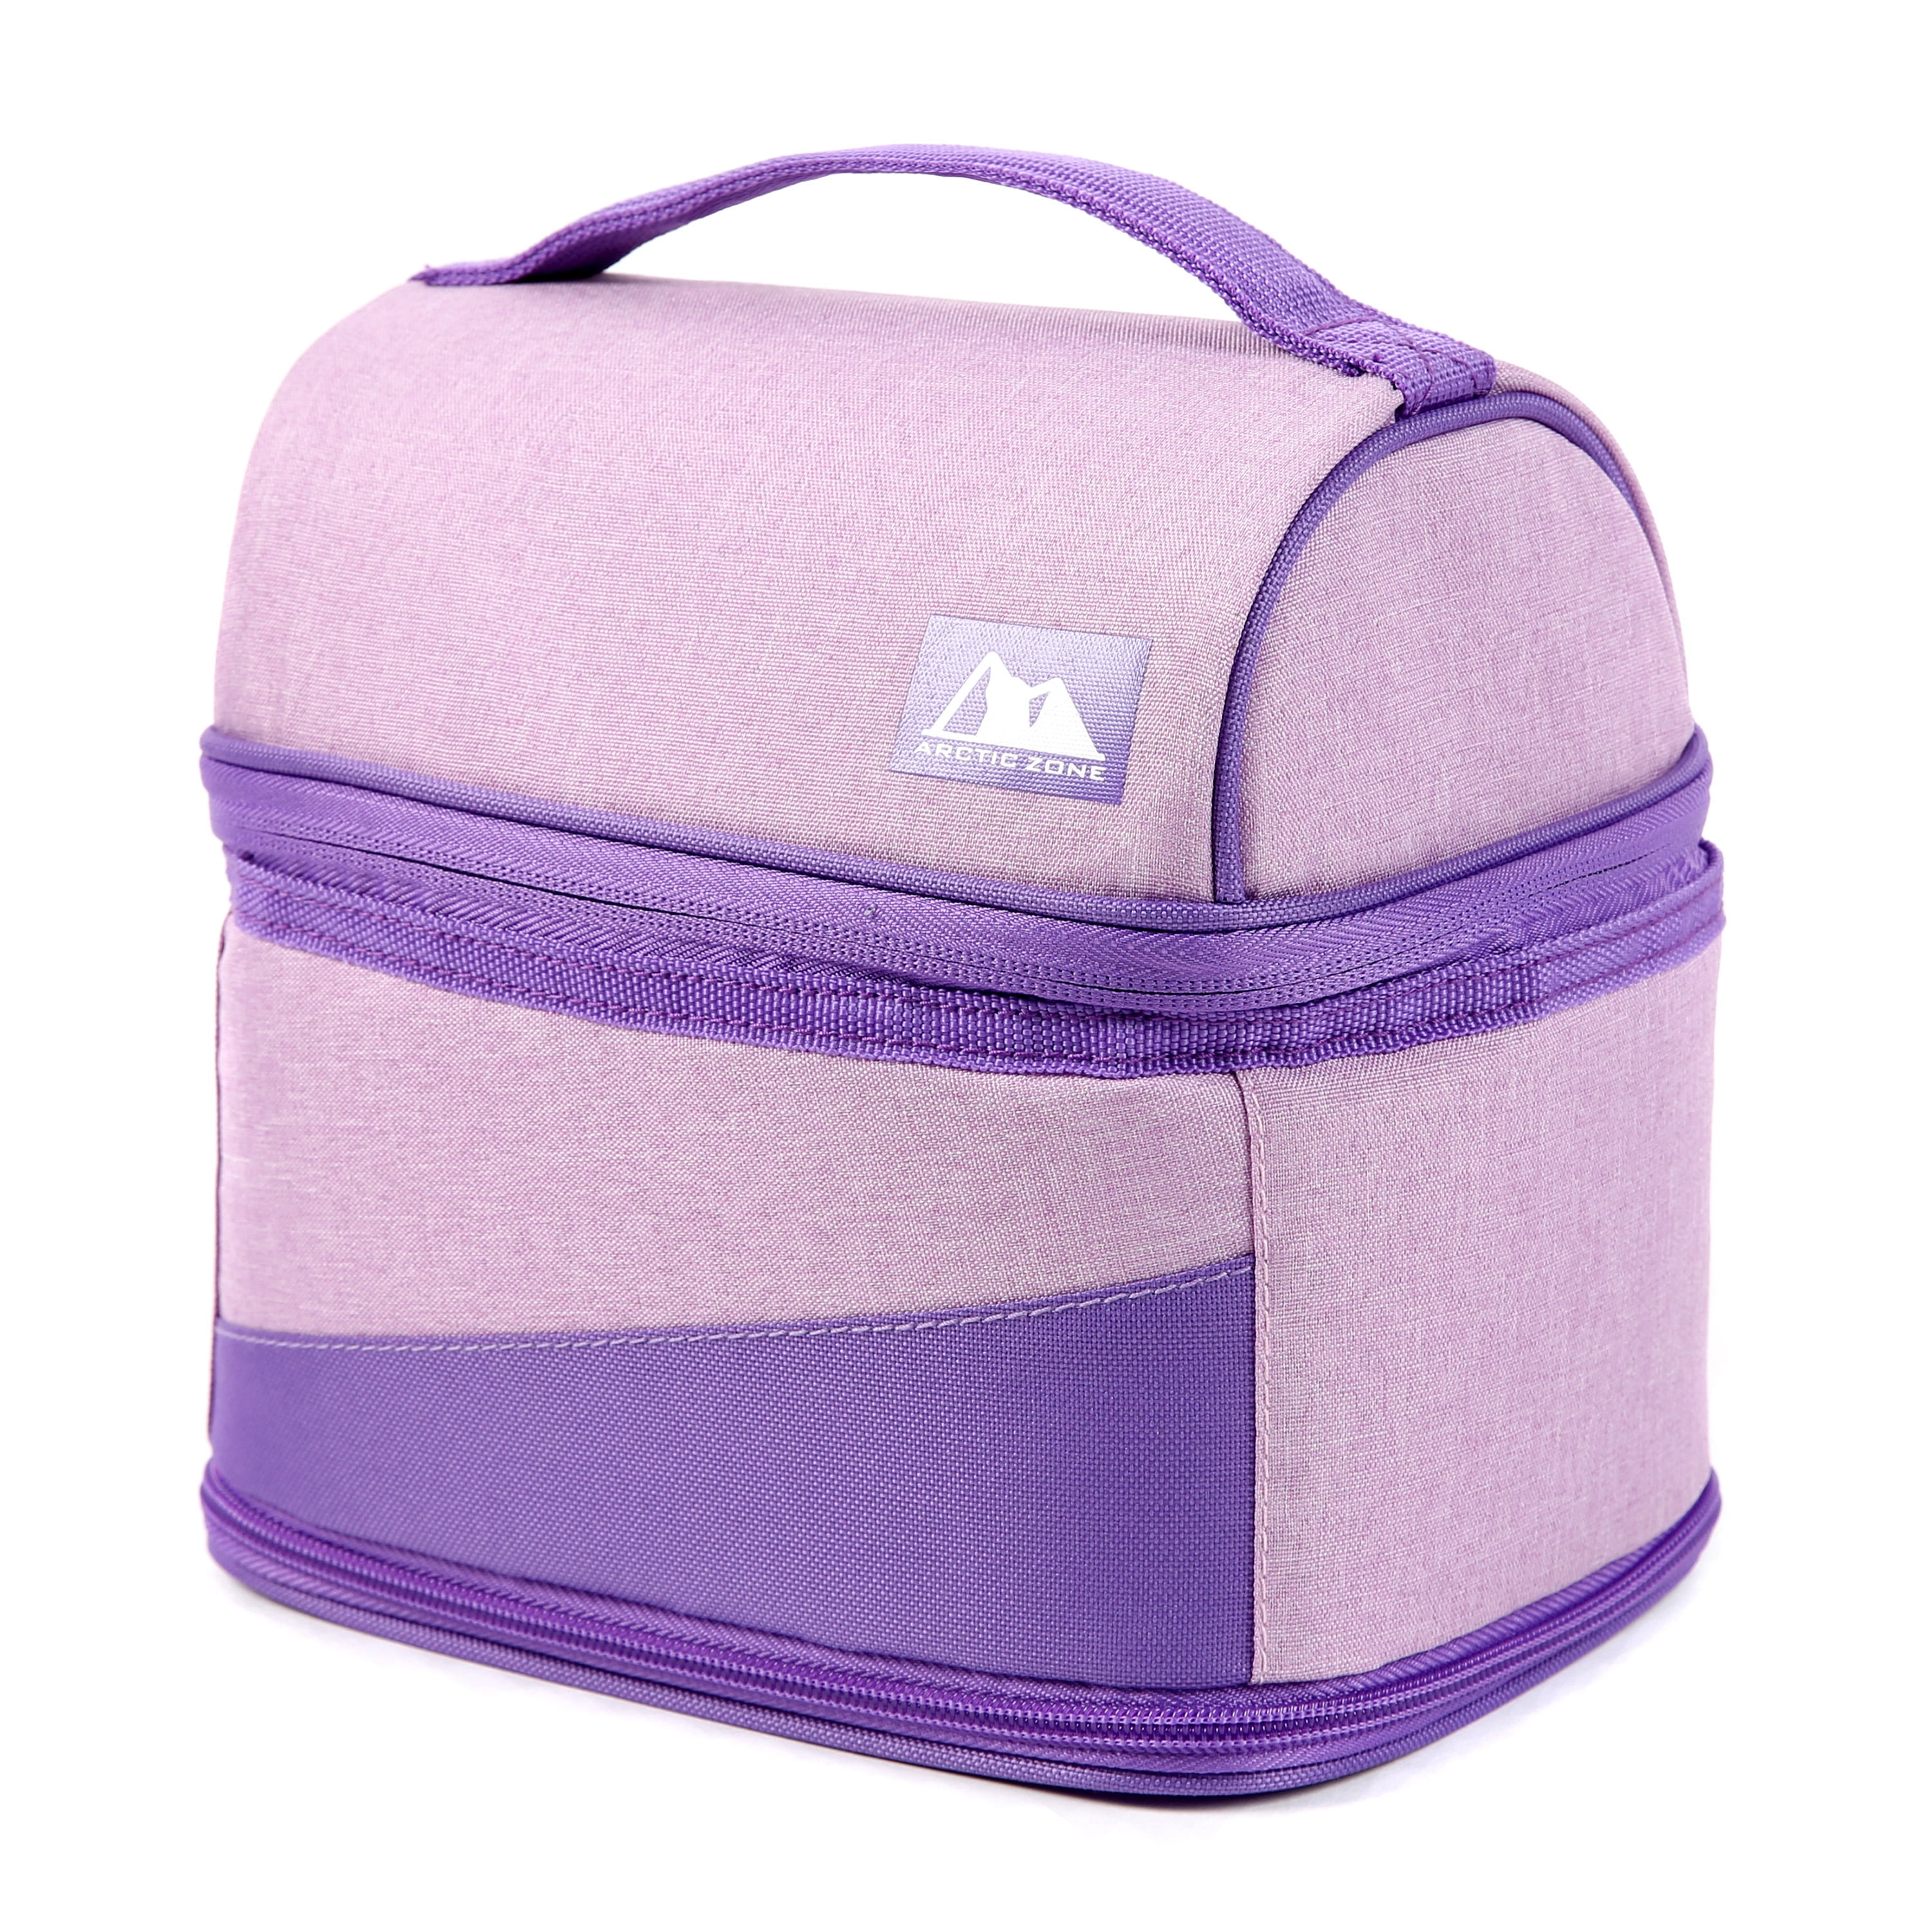 Frozen Sisters Forever Insulated Lunch Box Purple : Target